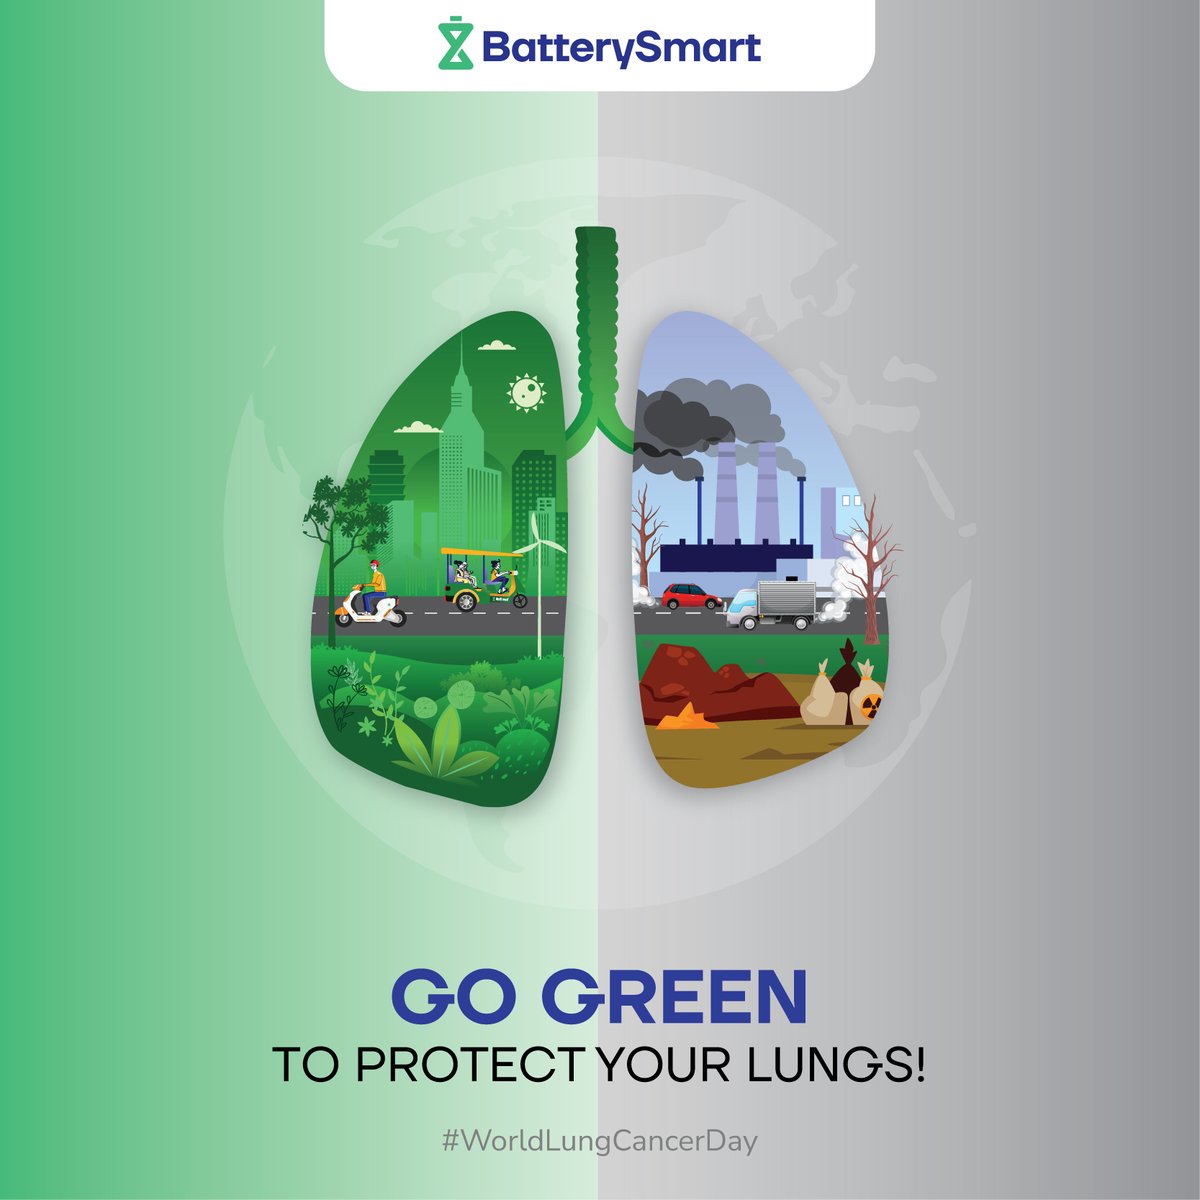 On World Lung Cancer Day, let's prioritize our well-being and the environment. Electric vehicles instead of fossil fuel-powered ones can help reduce air pollution and protect our lungs. 
 
 #WorldLungCancerDay #BatterySmart #Gurugram #CleanerAir #ChooseElectric